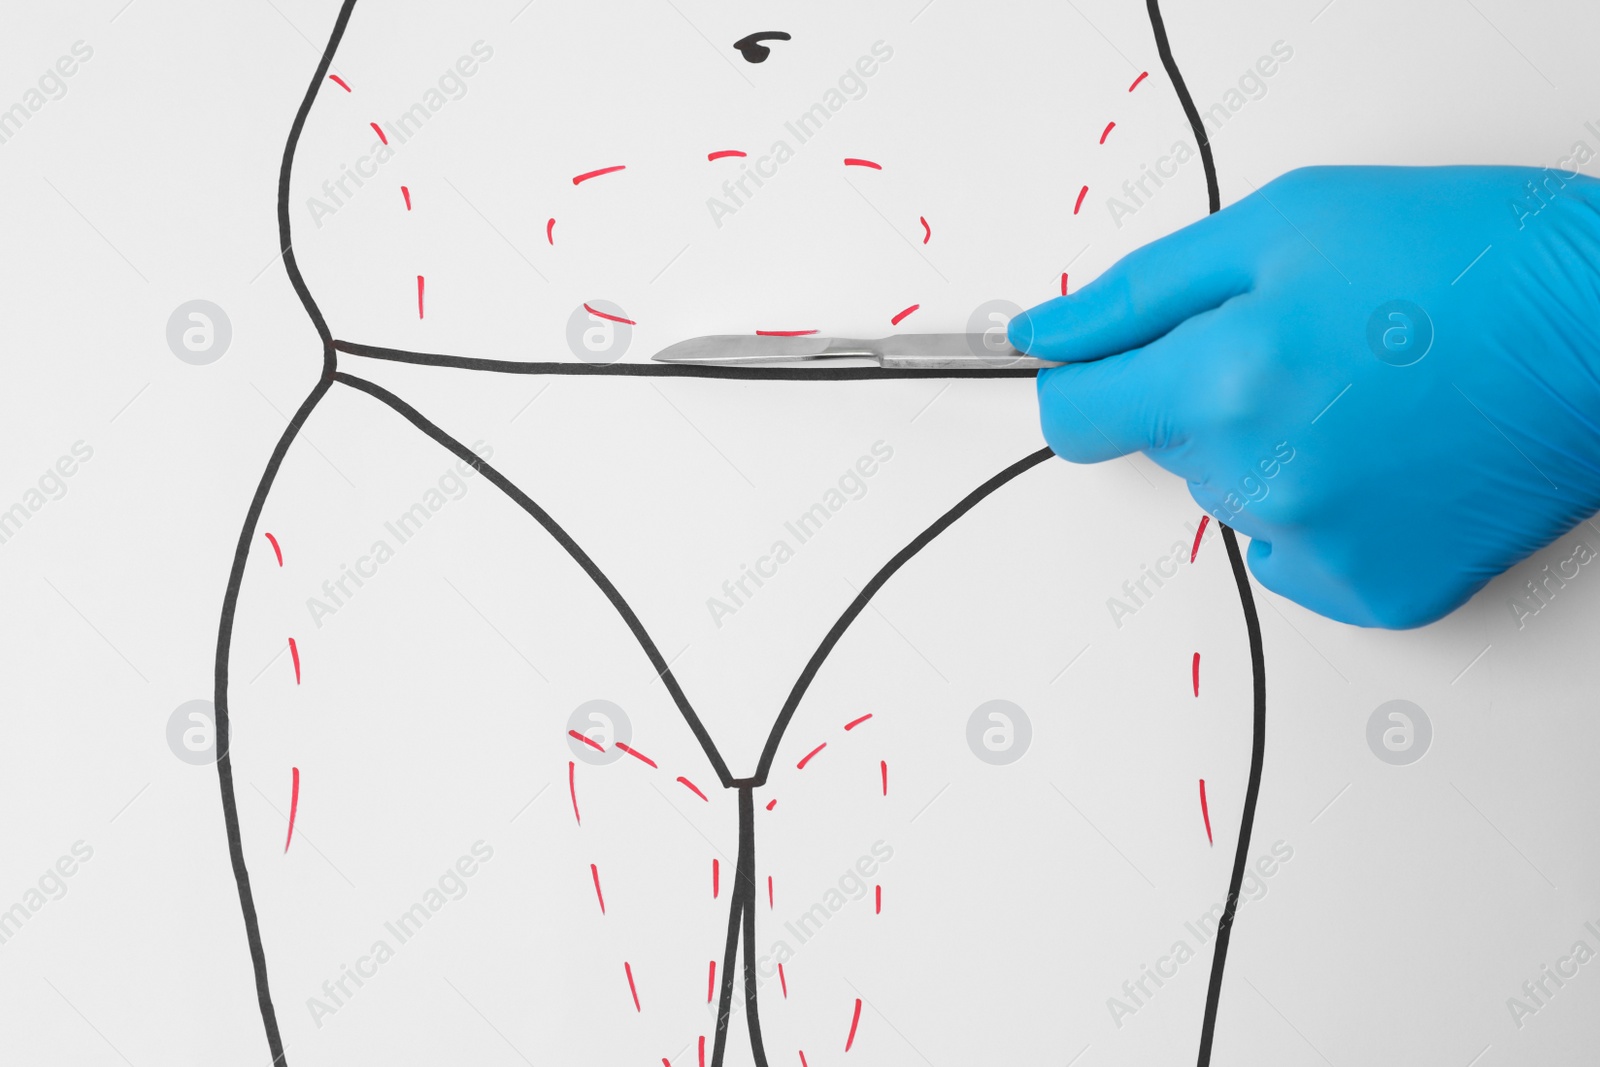 Photo of Doctor holding scalpel near drawn human body with marks on white background, top view. Weight loss surgery